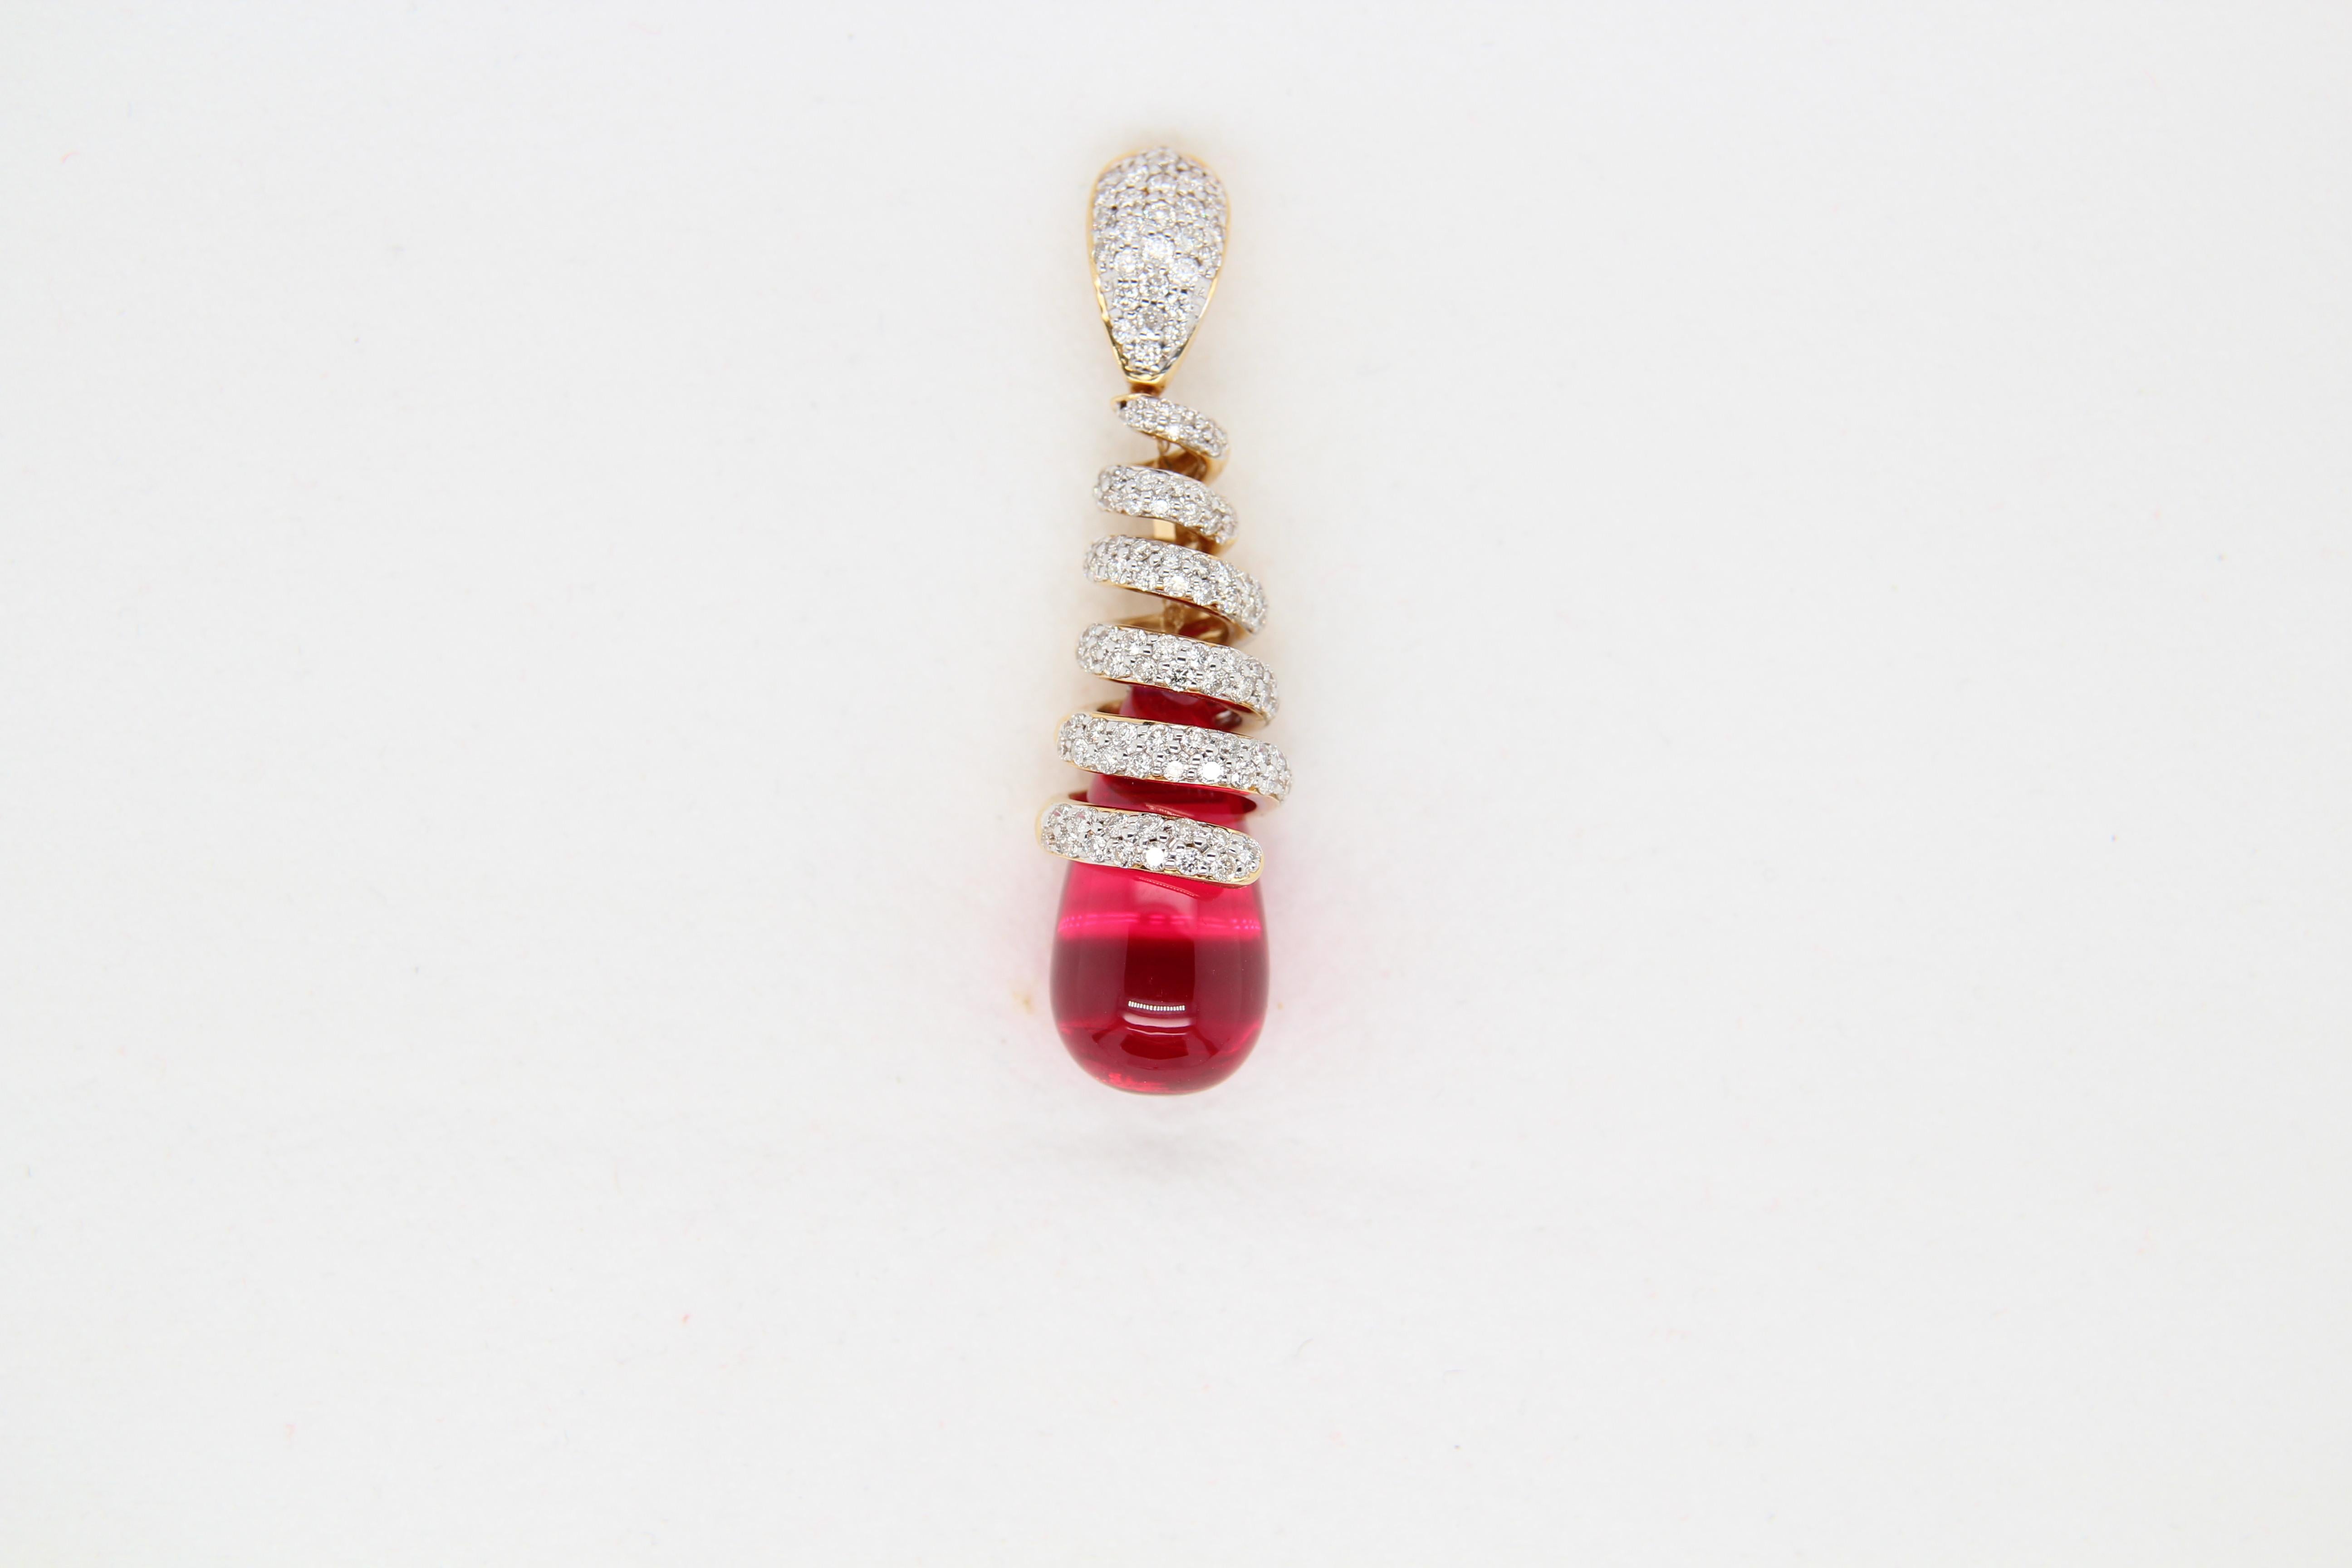 A brand new diamond and glass filled ruby pendant in 18 karat gold. The total diamond weighs 1.12 carat and glass filled ruby weighs 12.50 carat. The total weight of pendant is 11.01 grams. The pendant does not include a chain.